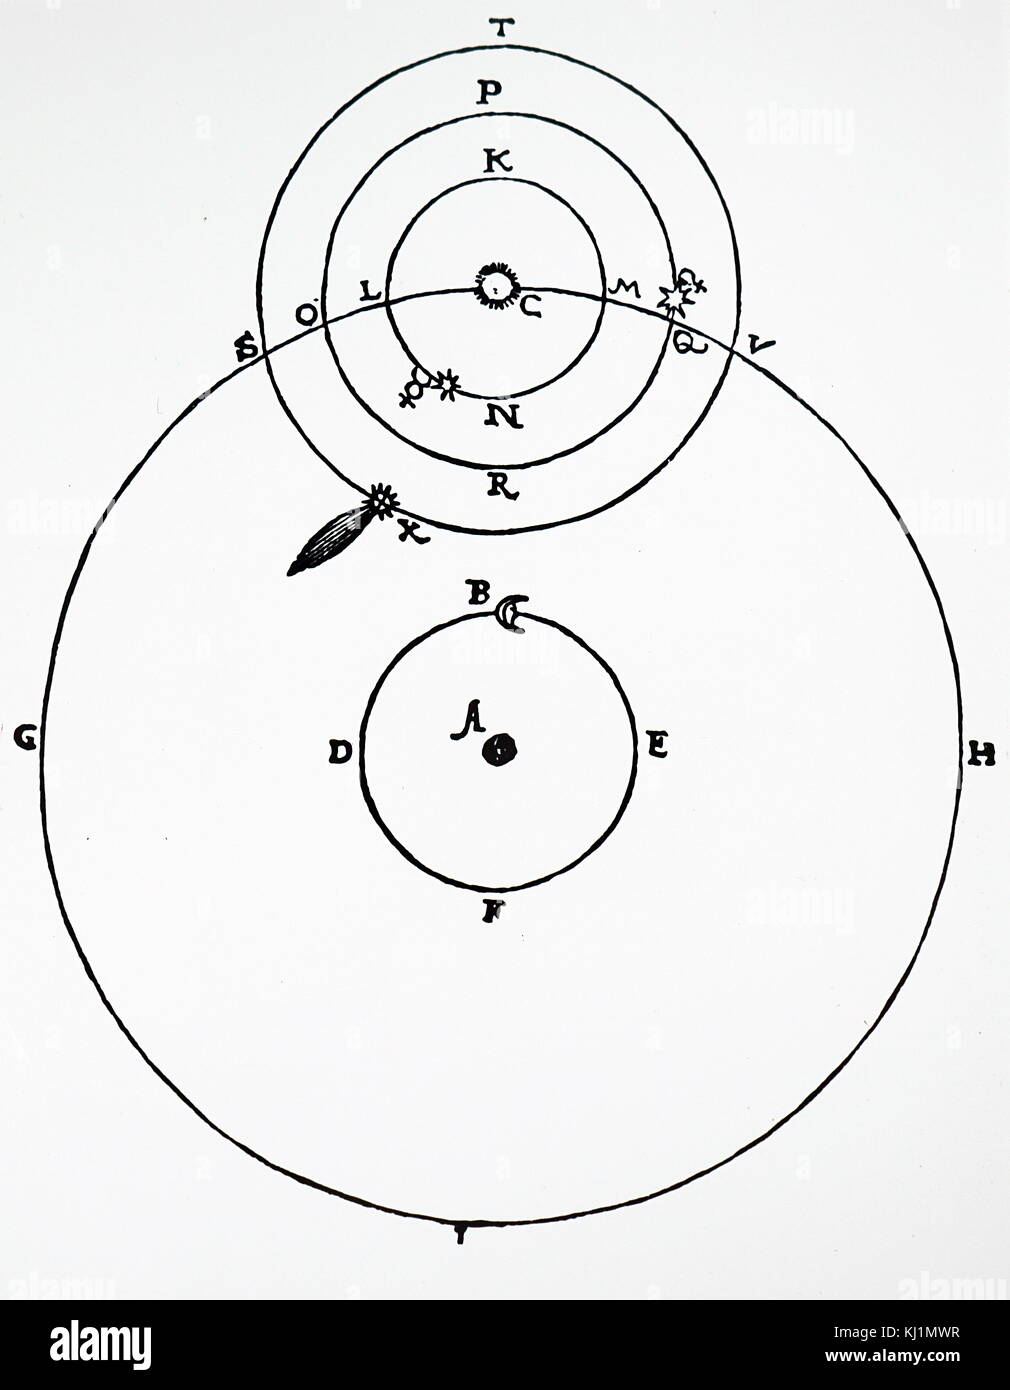 Diagram depicting Tycho Brahe's planetary system showing at X the comet of 1577. Dated 16th Century Stock Photo